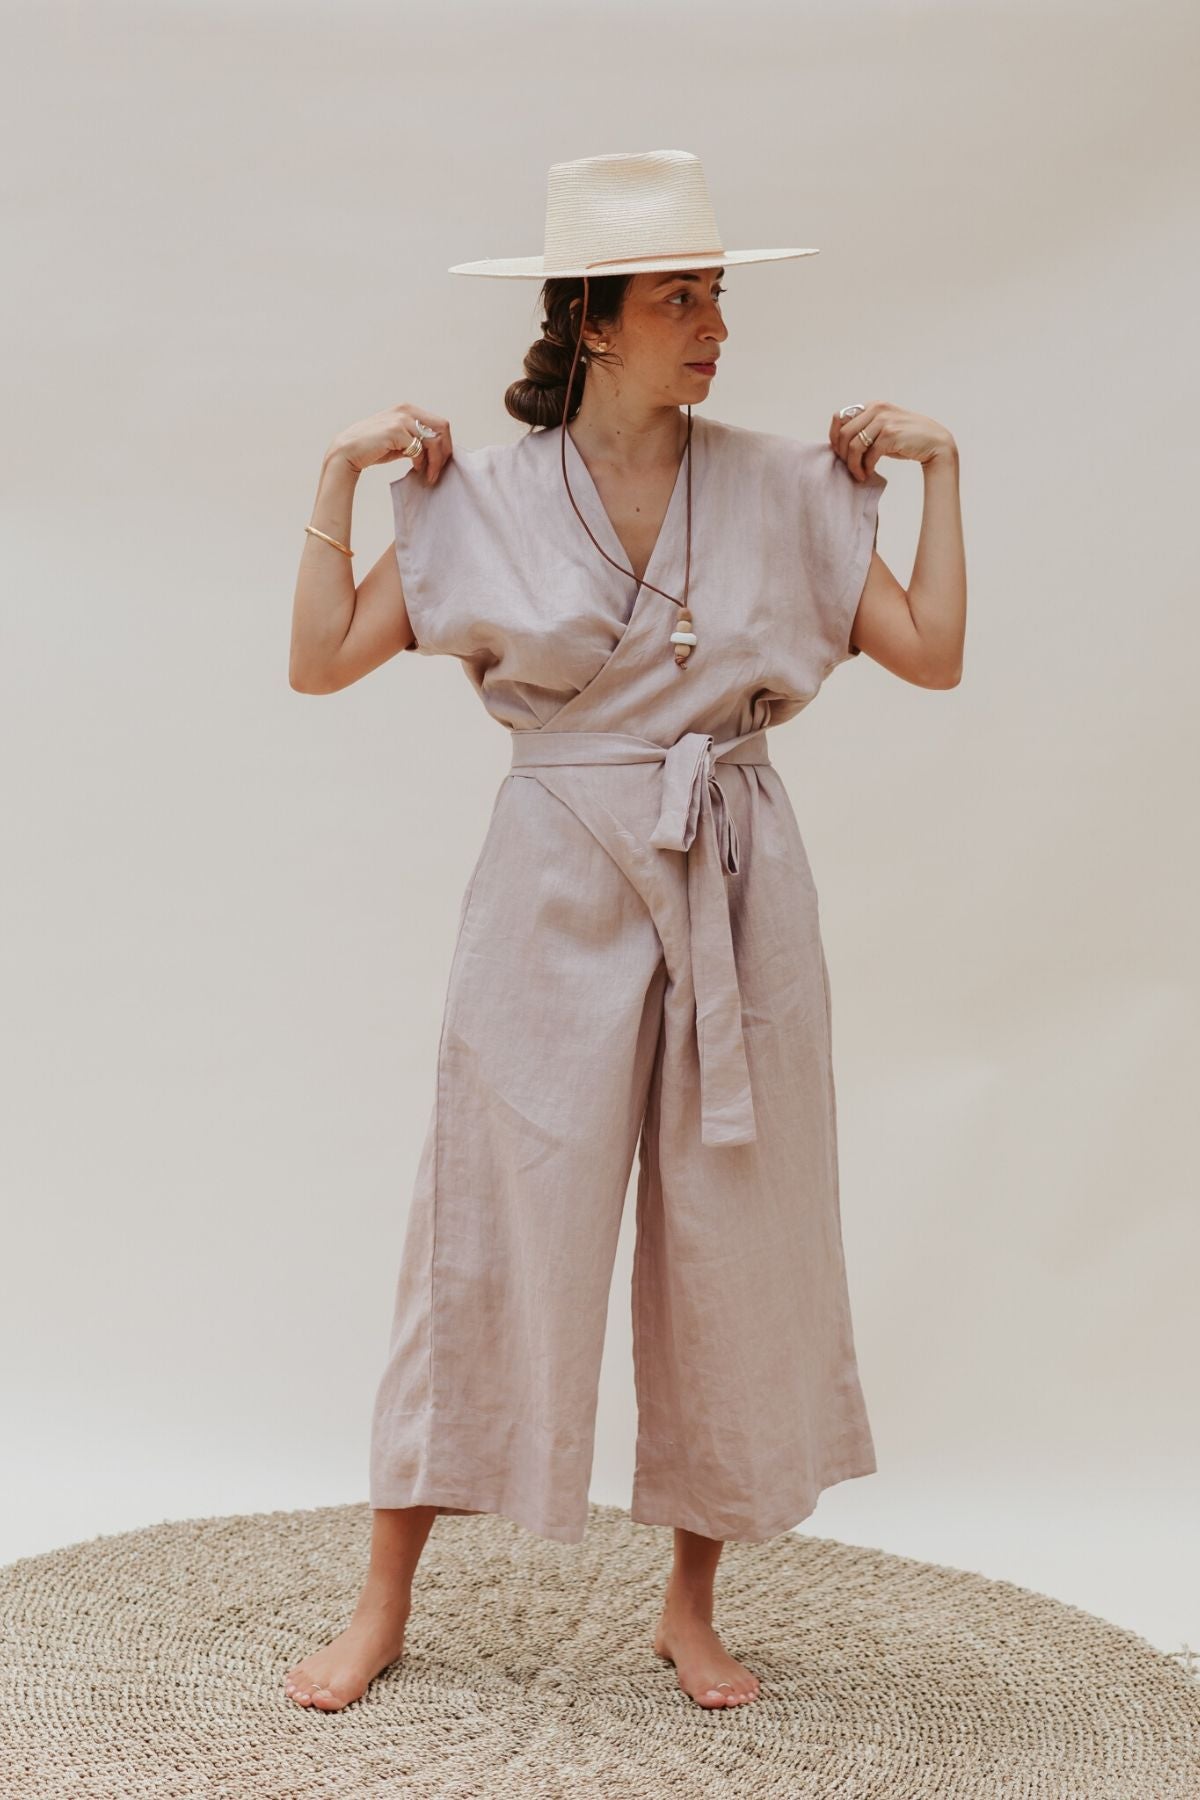 Limited Edition Rey Playsuit (100% Linen, Royal Lavender/Nude)